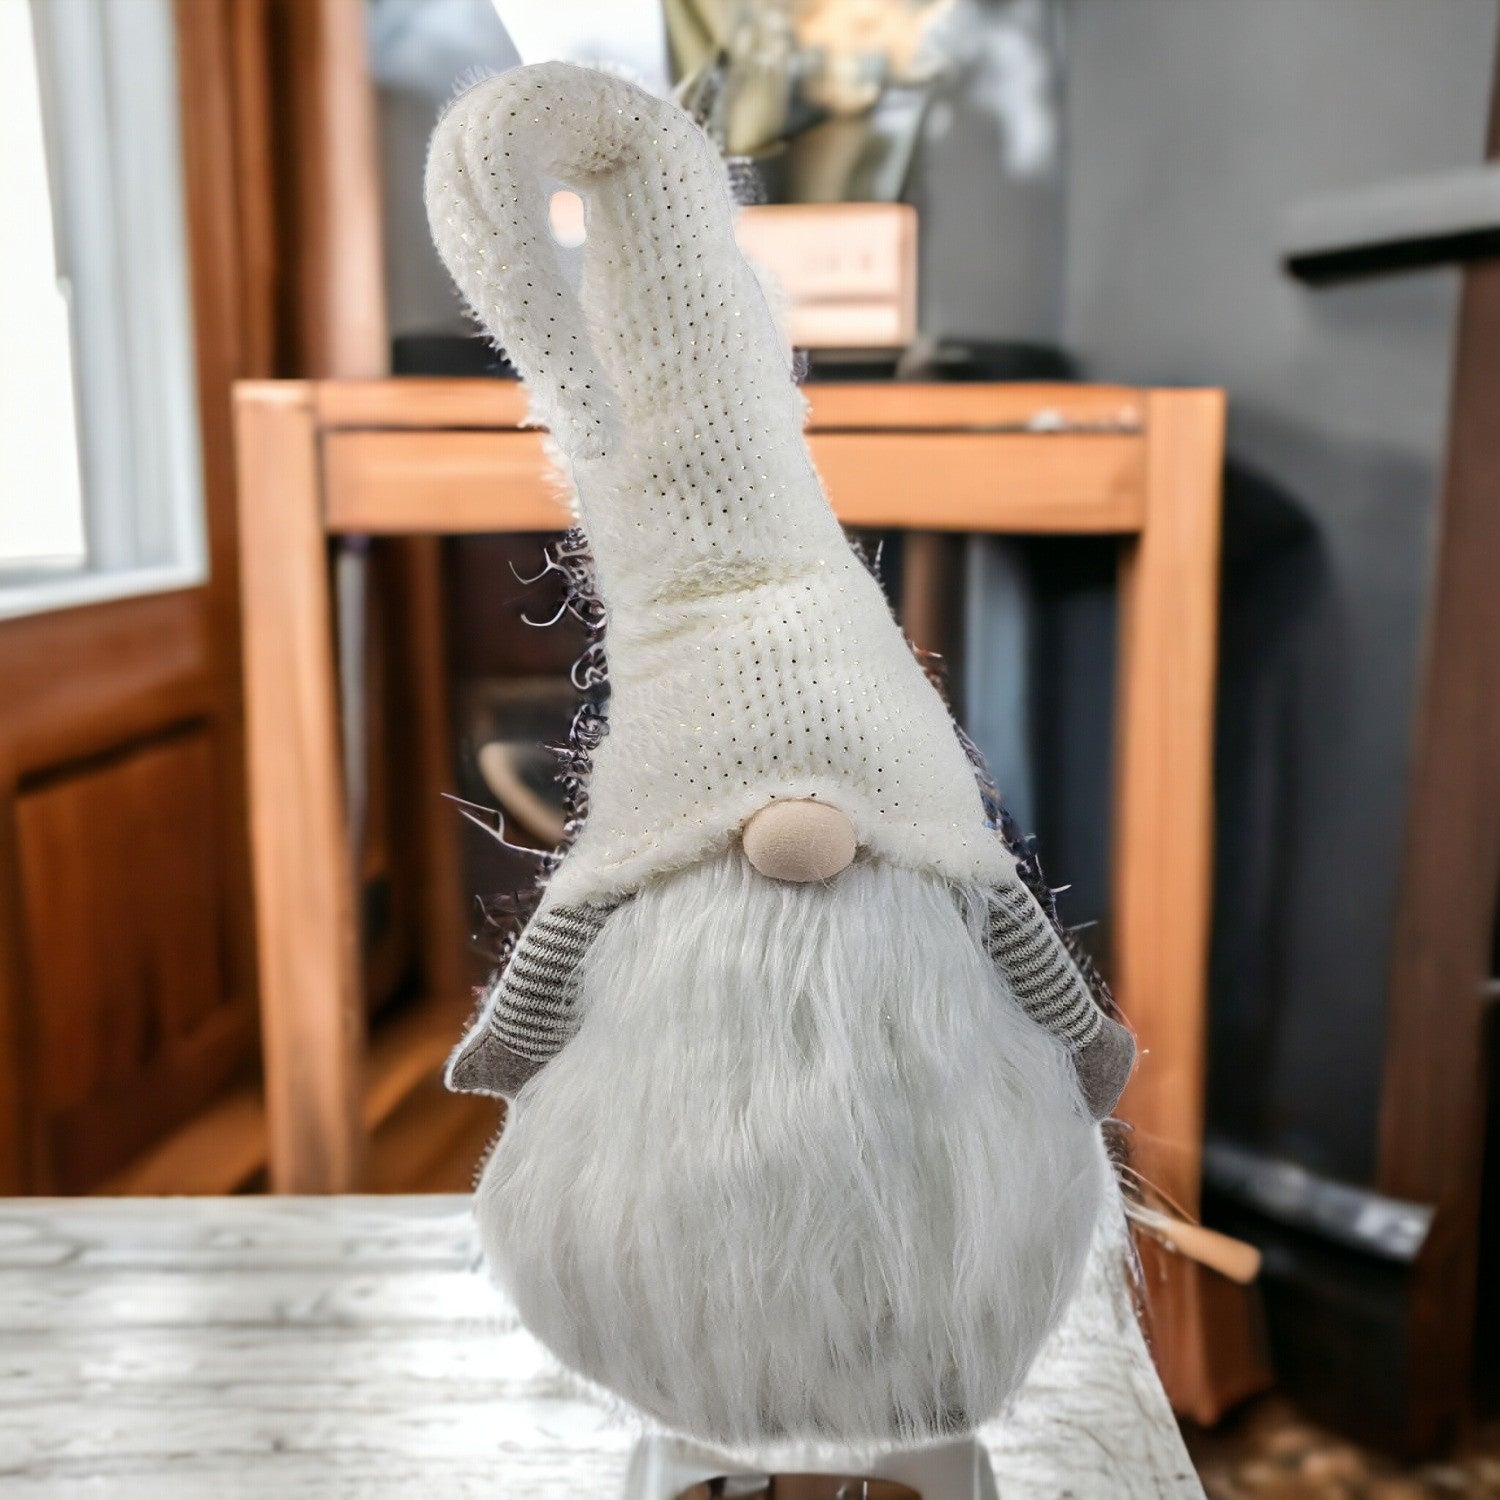 32" White with Long Hat Fabric Sitting Gnome Sculpture